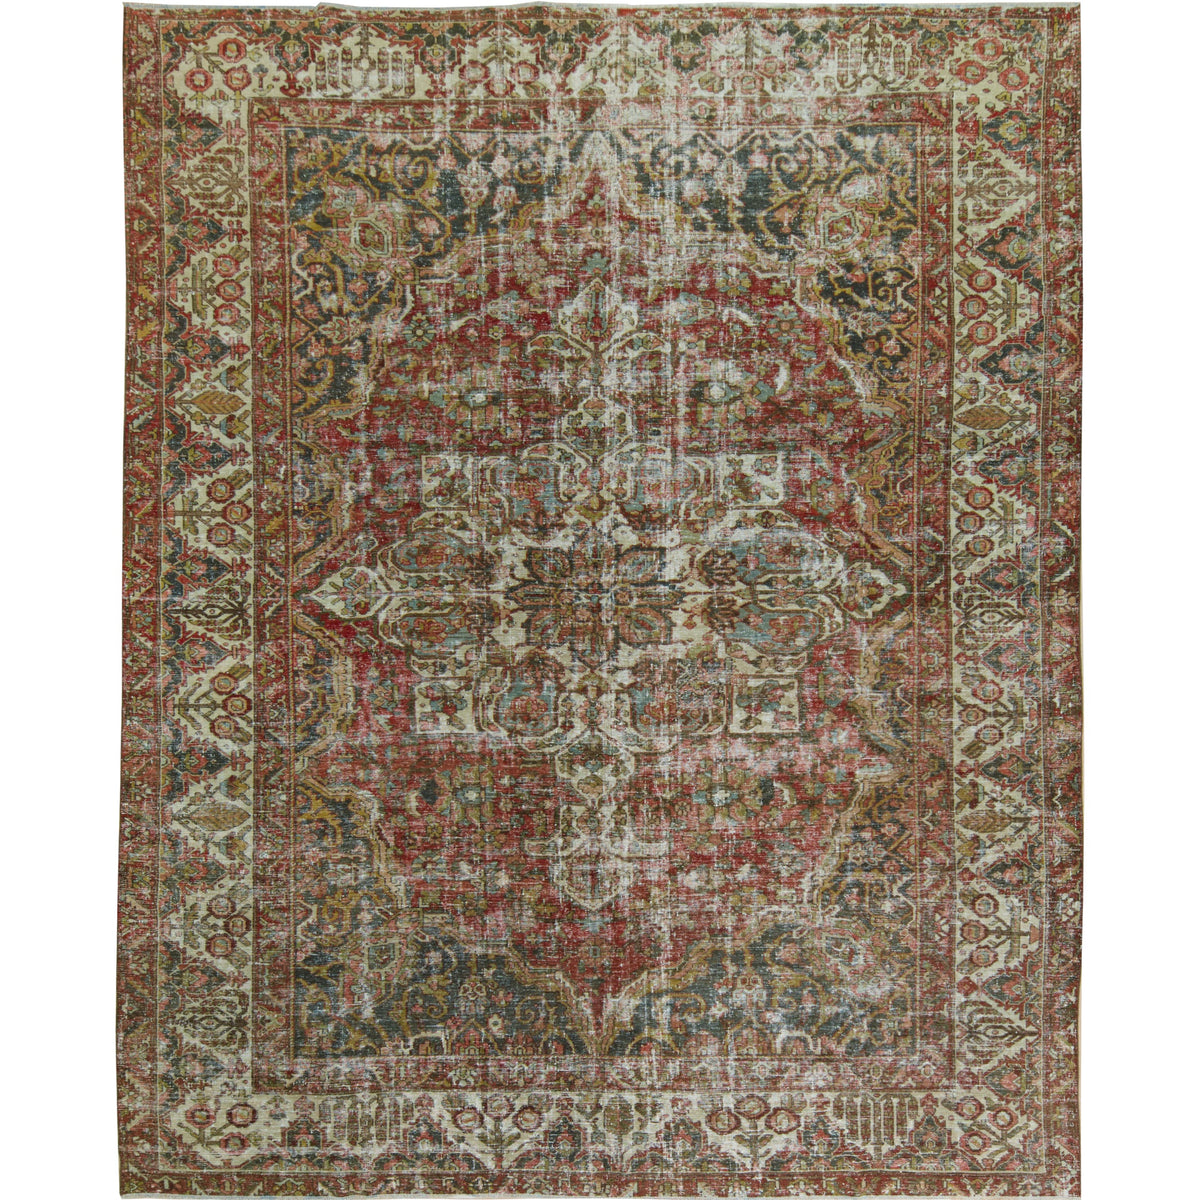 Rephaela - Vintage Turkish Rug, Elevating Your Floors with Timeless Beauty | Kuden Rugs